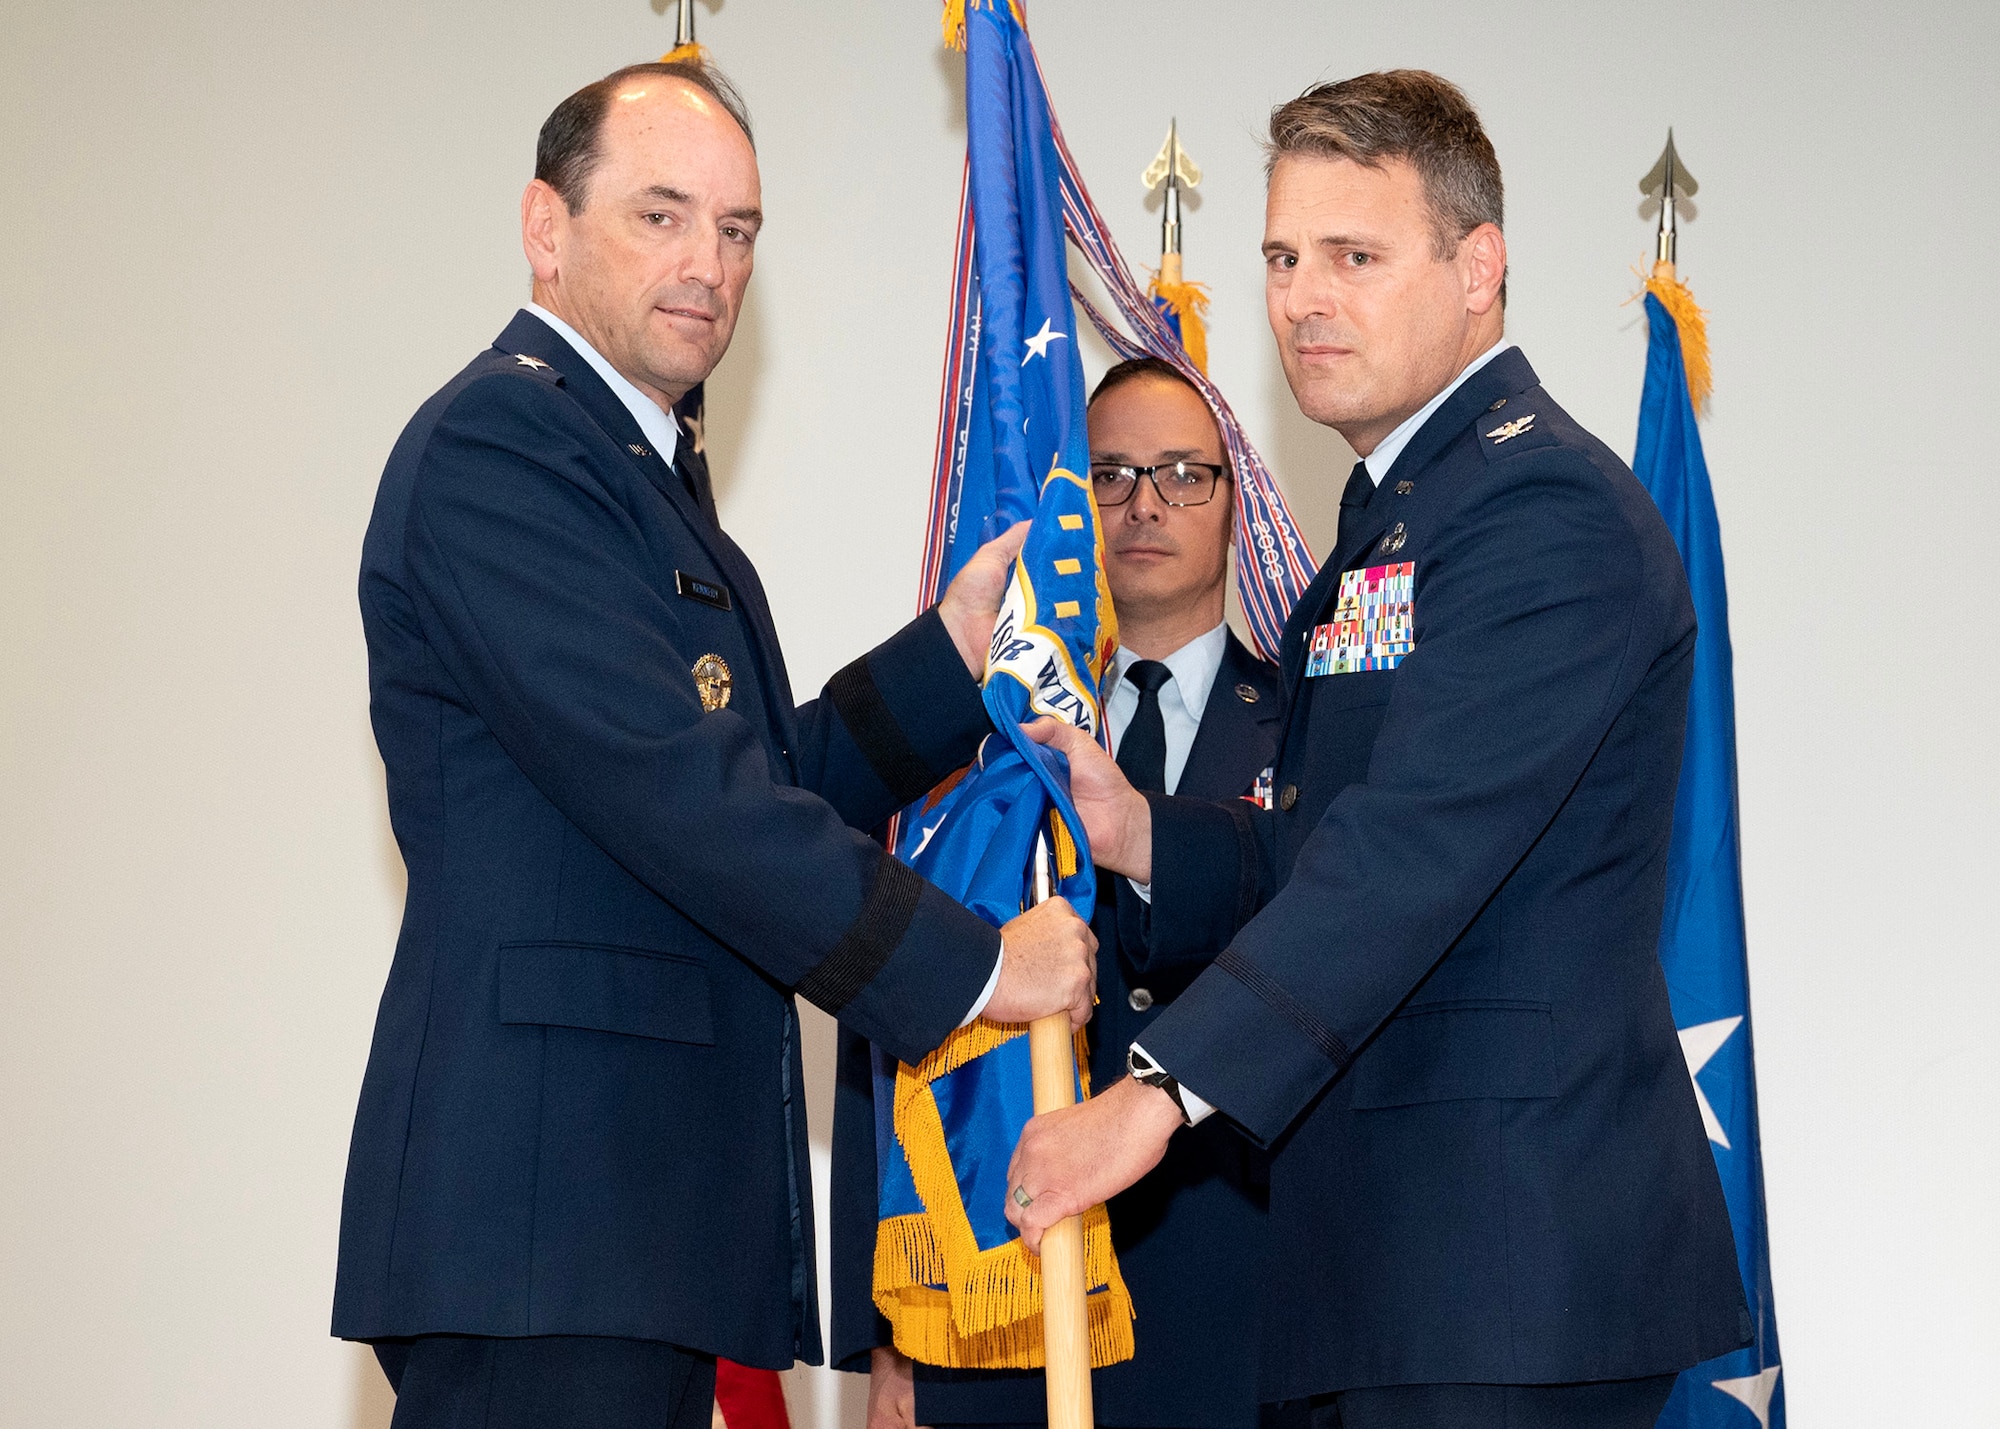 U.S. Air Force Lt. Gen. Kevin B. Kennedy, 16th Air Force (Air Forces Cyber) commander, receives the 70th Intelligence, Surveillance and Reconnaissance Wing guidon from U.S. Air Force Col. Craig S. Miller, 70th ISRW commander, during a Change of Command Ceremony June 9, 2023, at Fort George G. Meade, Maryland. Kennedy was the presiding officer for the ceremony, which Miller relinquished command of the 70th ISRW to U.S. Air Force Col. Celina E. Noyes. (U.S. photo by Staff Sgt. Kevin Iinuma)